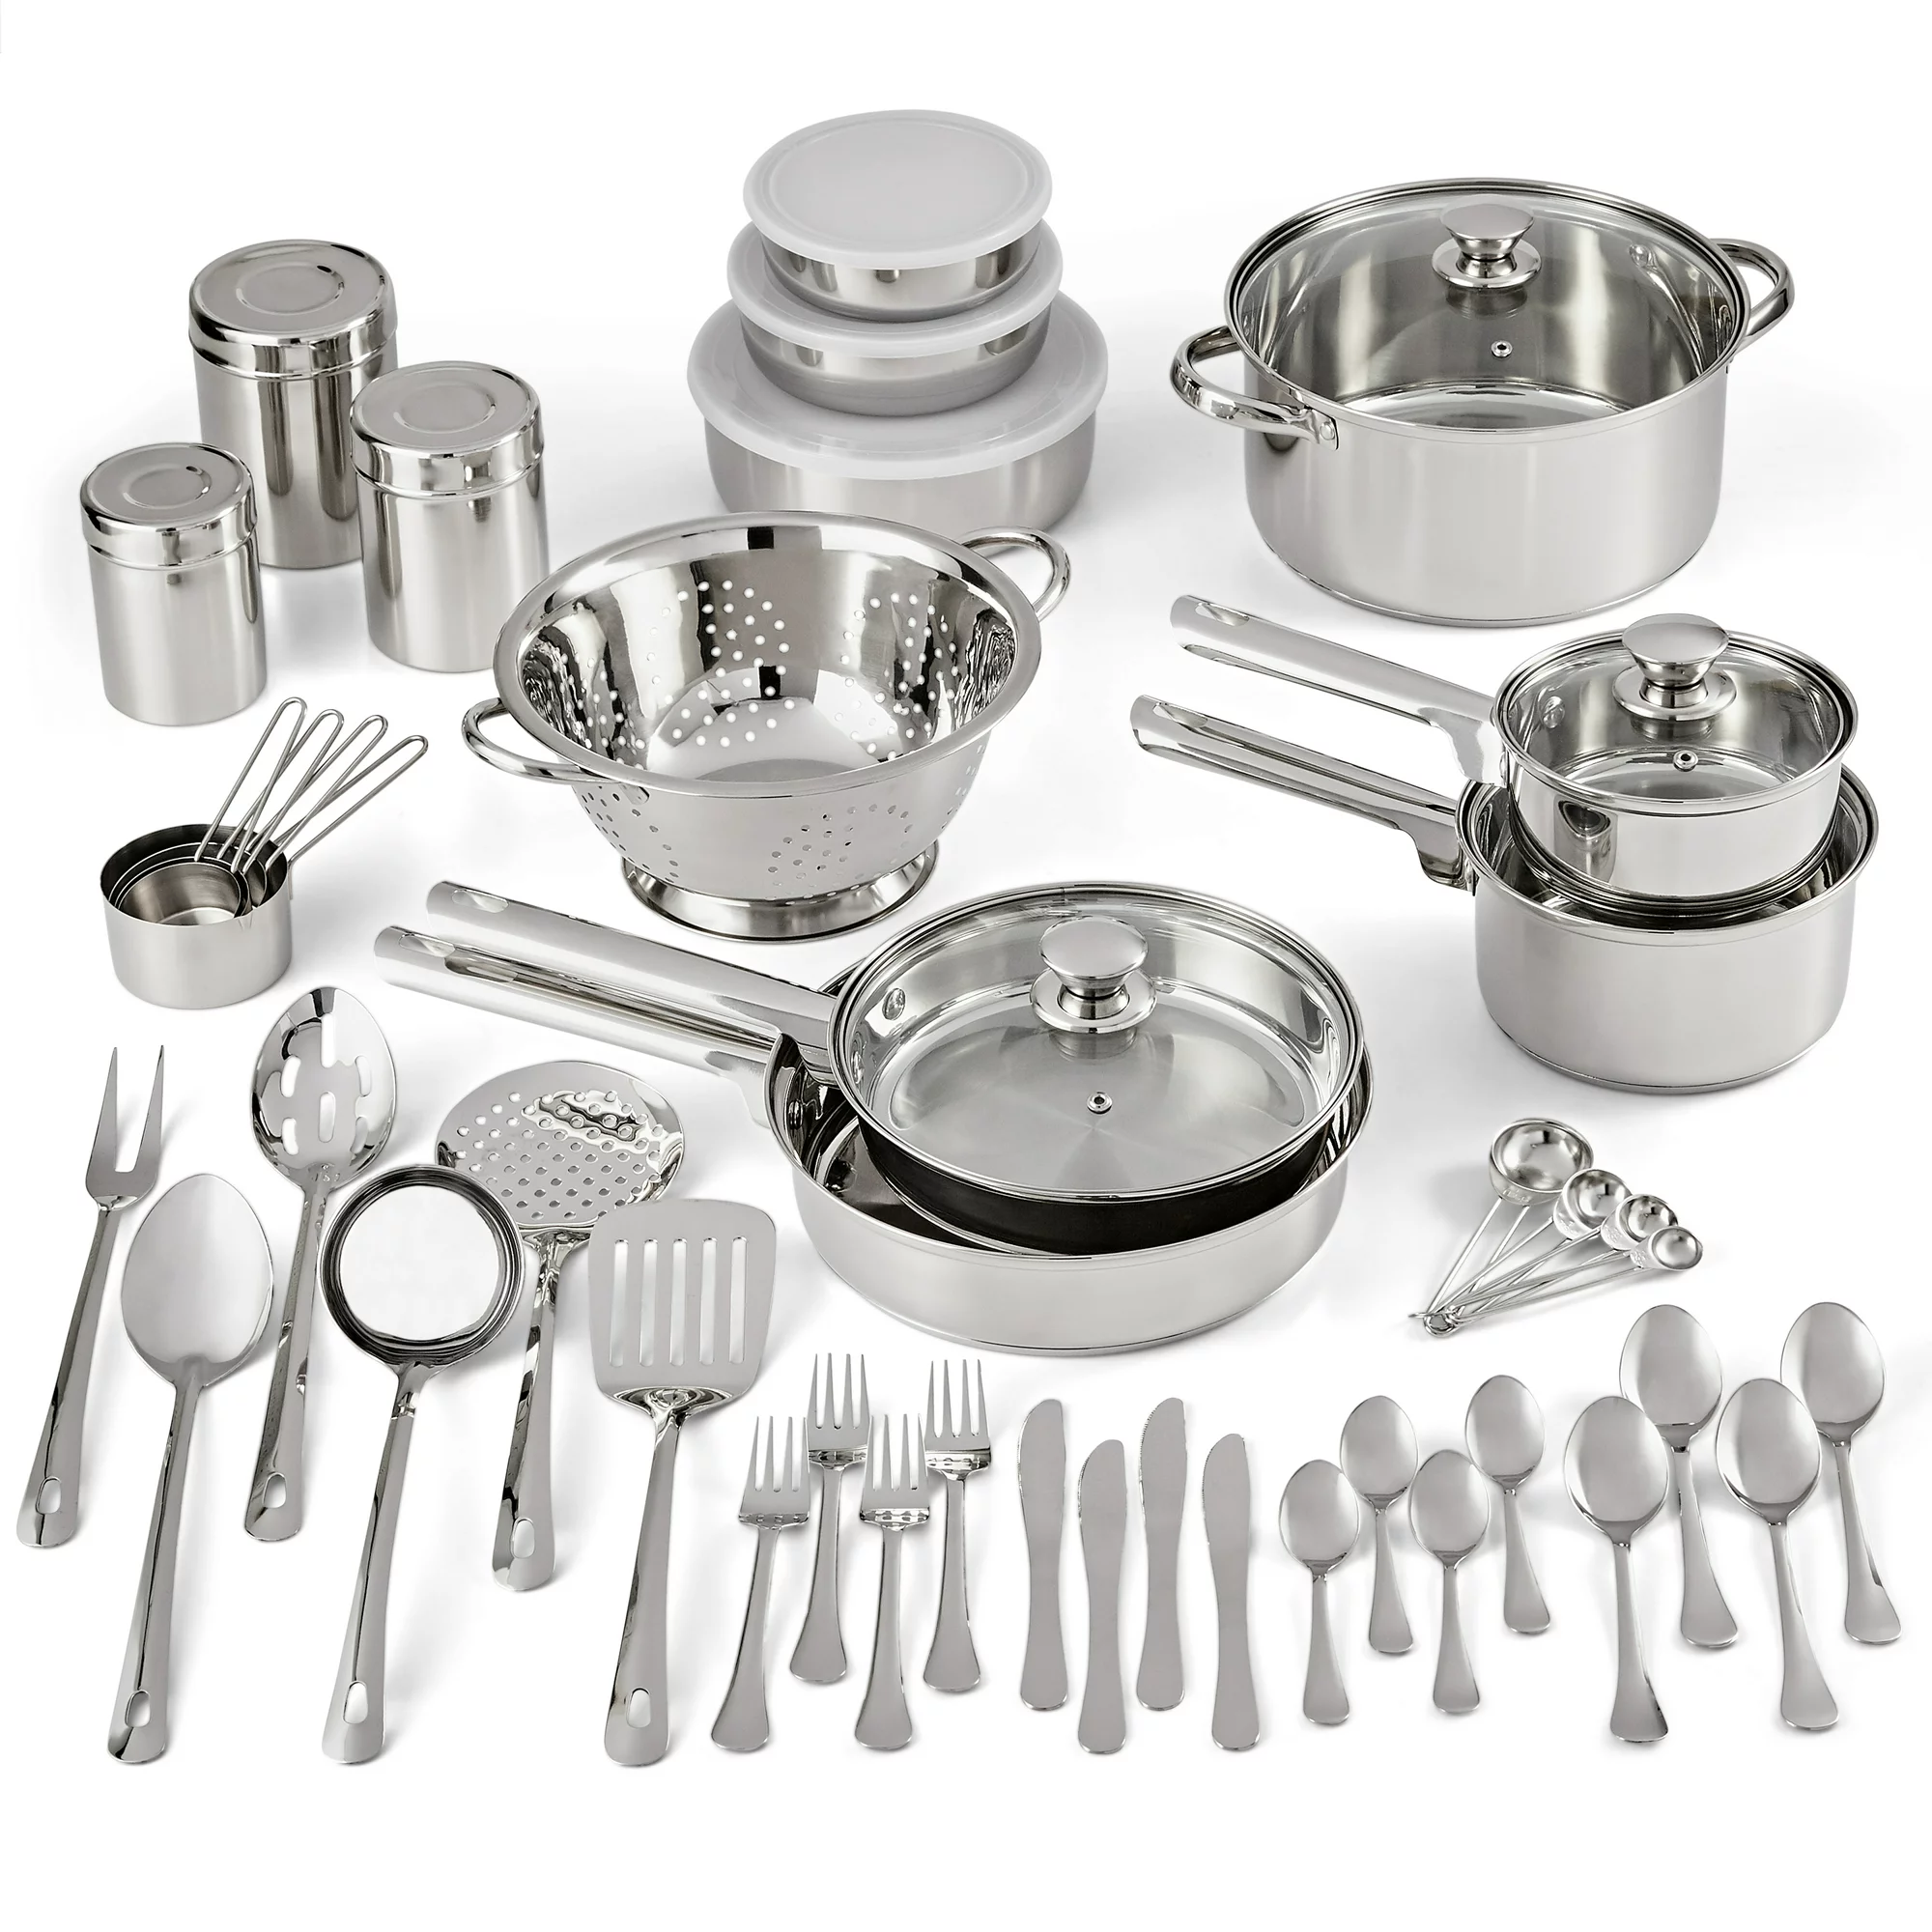 https://discounttoday.net/wp-content/uploads/2022/10/Mainstays-ECB52SE-Stainless-Steel-Cookware-and-Kitchen-Combo-Set.webp